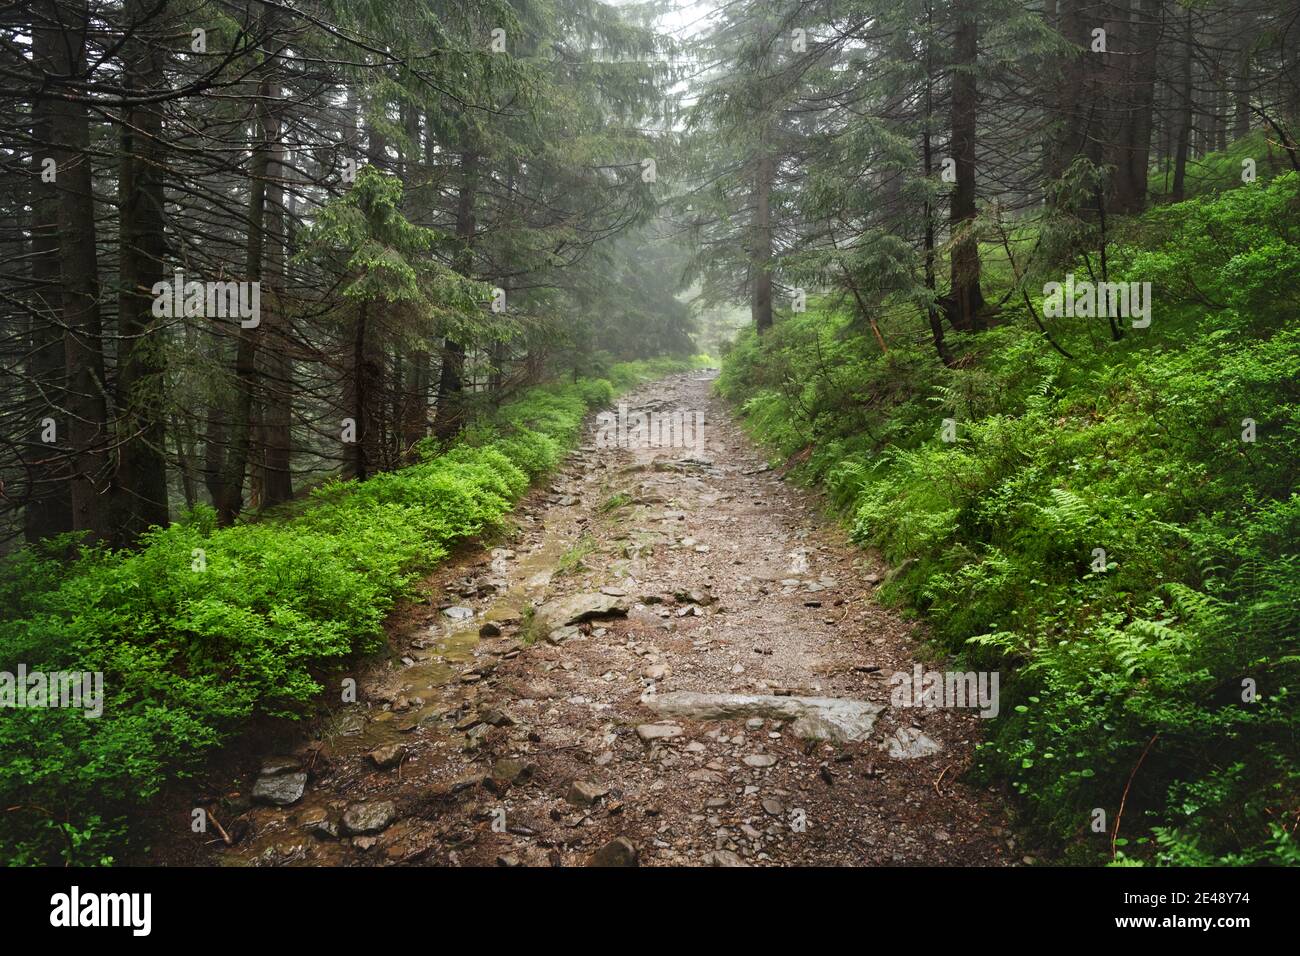 Beautiful evergreen forest with pine trees and trail. Nature background, landscape photography Stock Photo